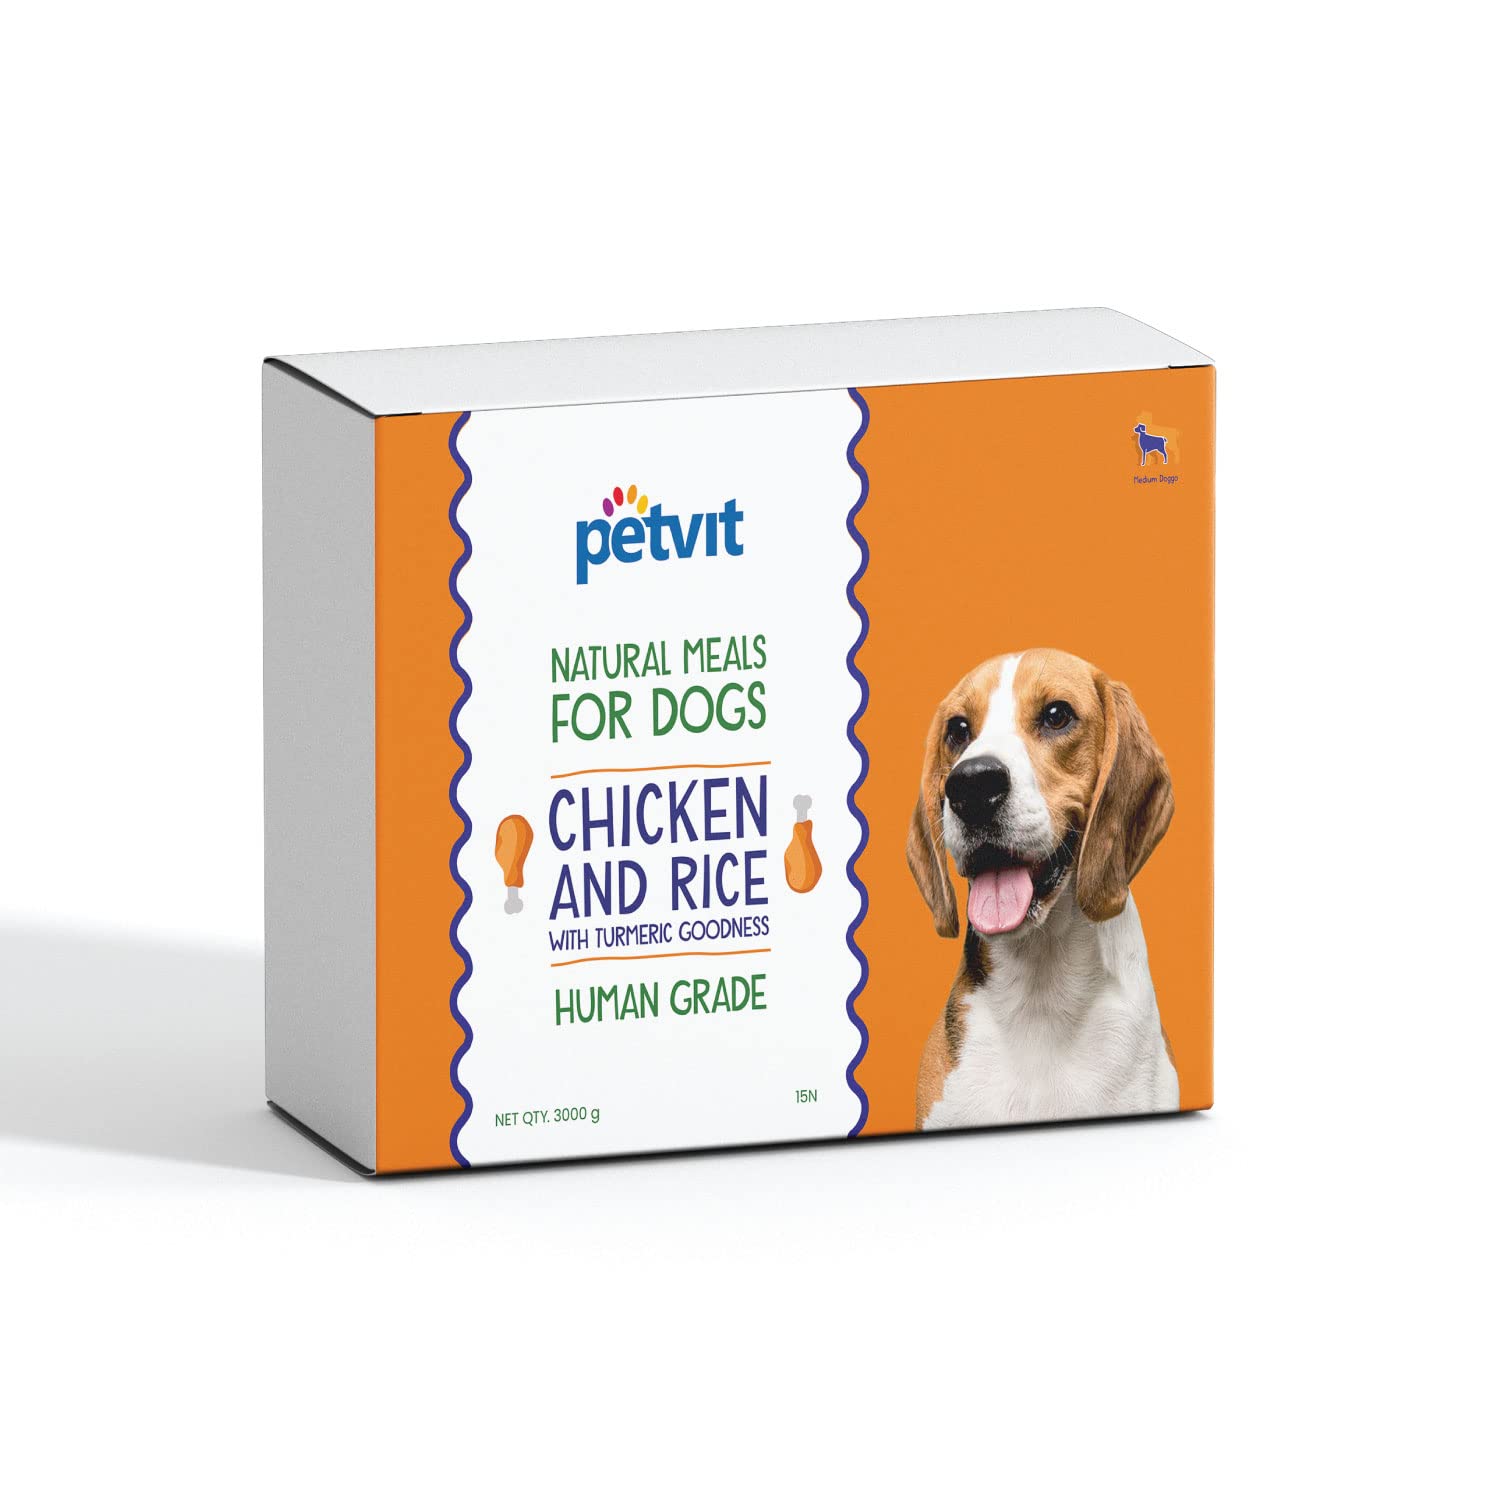 Petvit Natural Meal for Dogs - Chicken Rice with Turmeric (15 Pack, 200g Each) - Healthy and Nutritious Dog Food